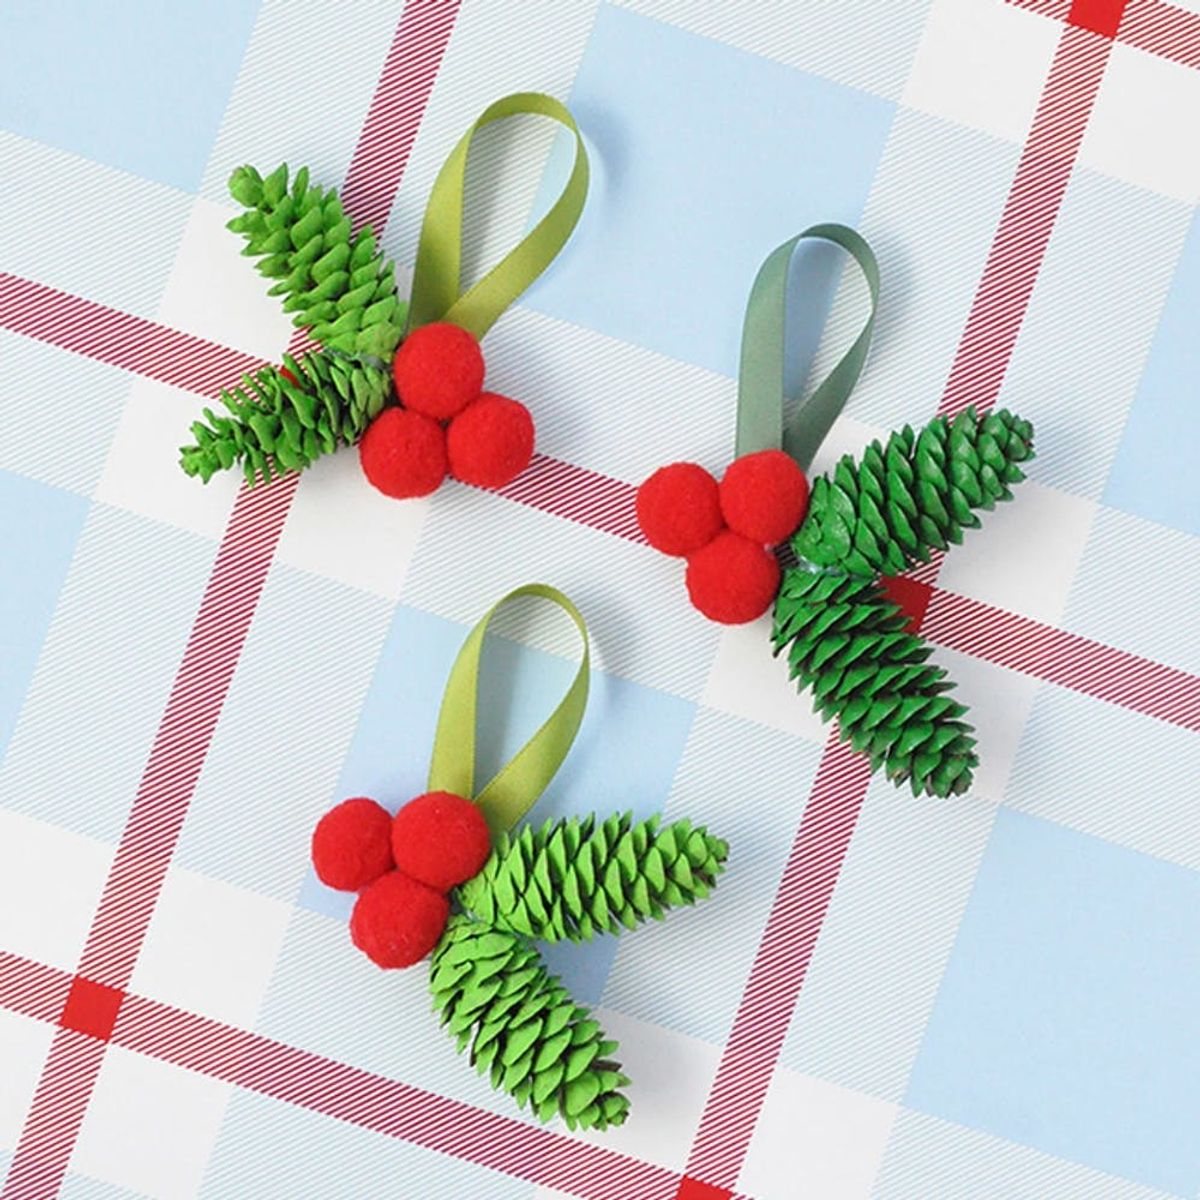 Reindeer Balloons, Geometric Tree Skirts, Gift Wrapping Ideas, and More Last-Minute Holiday Crafts